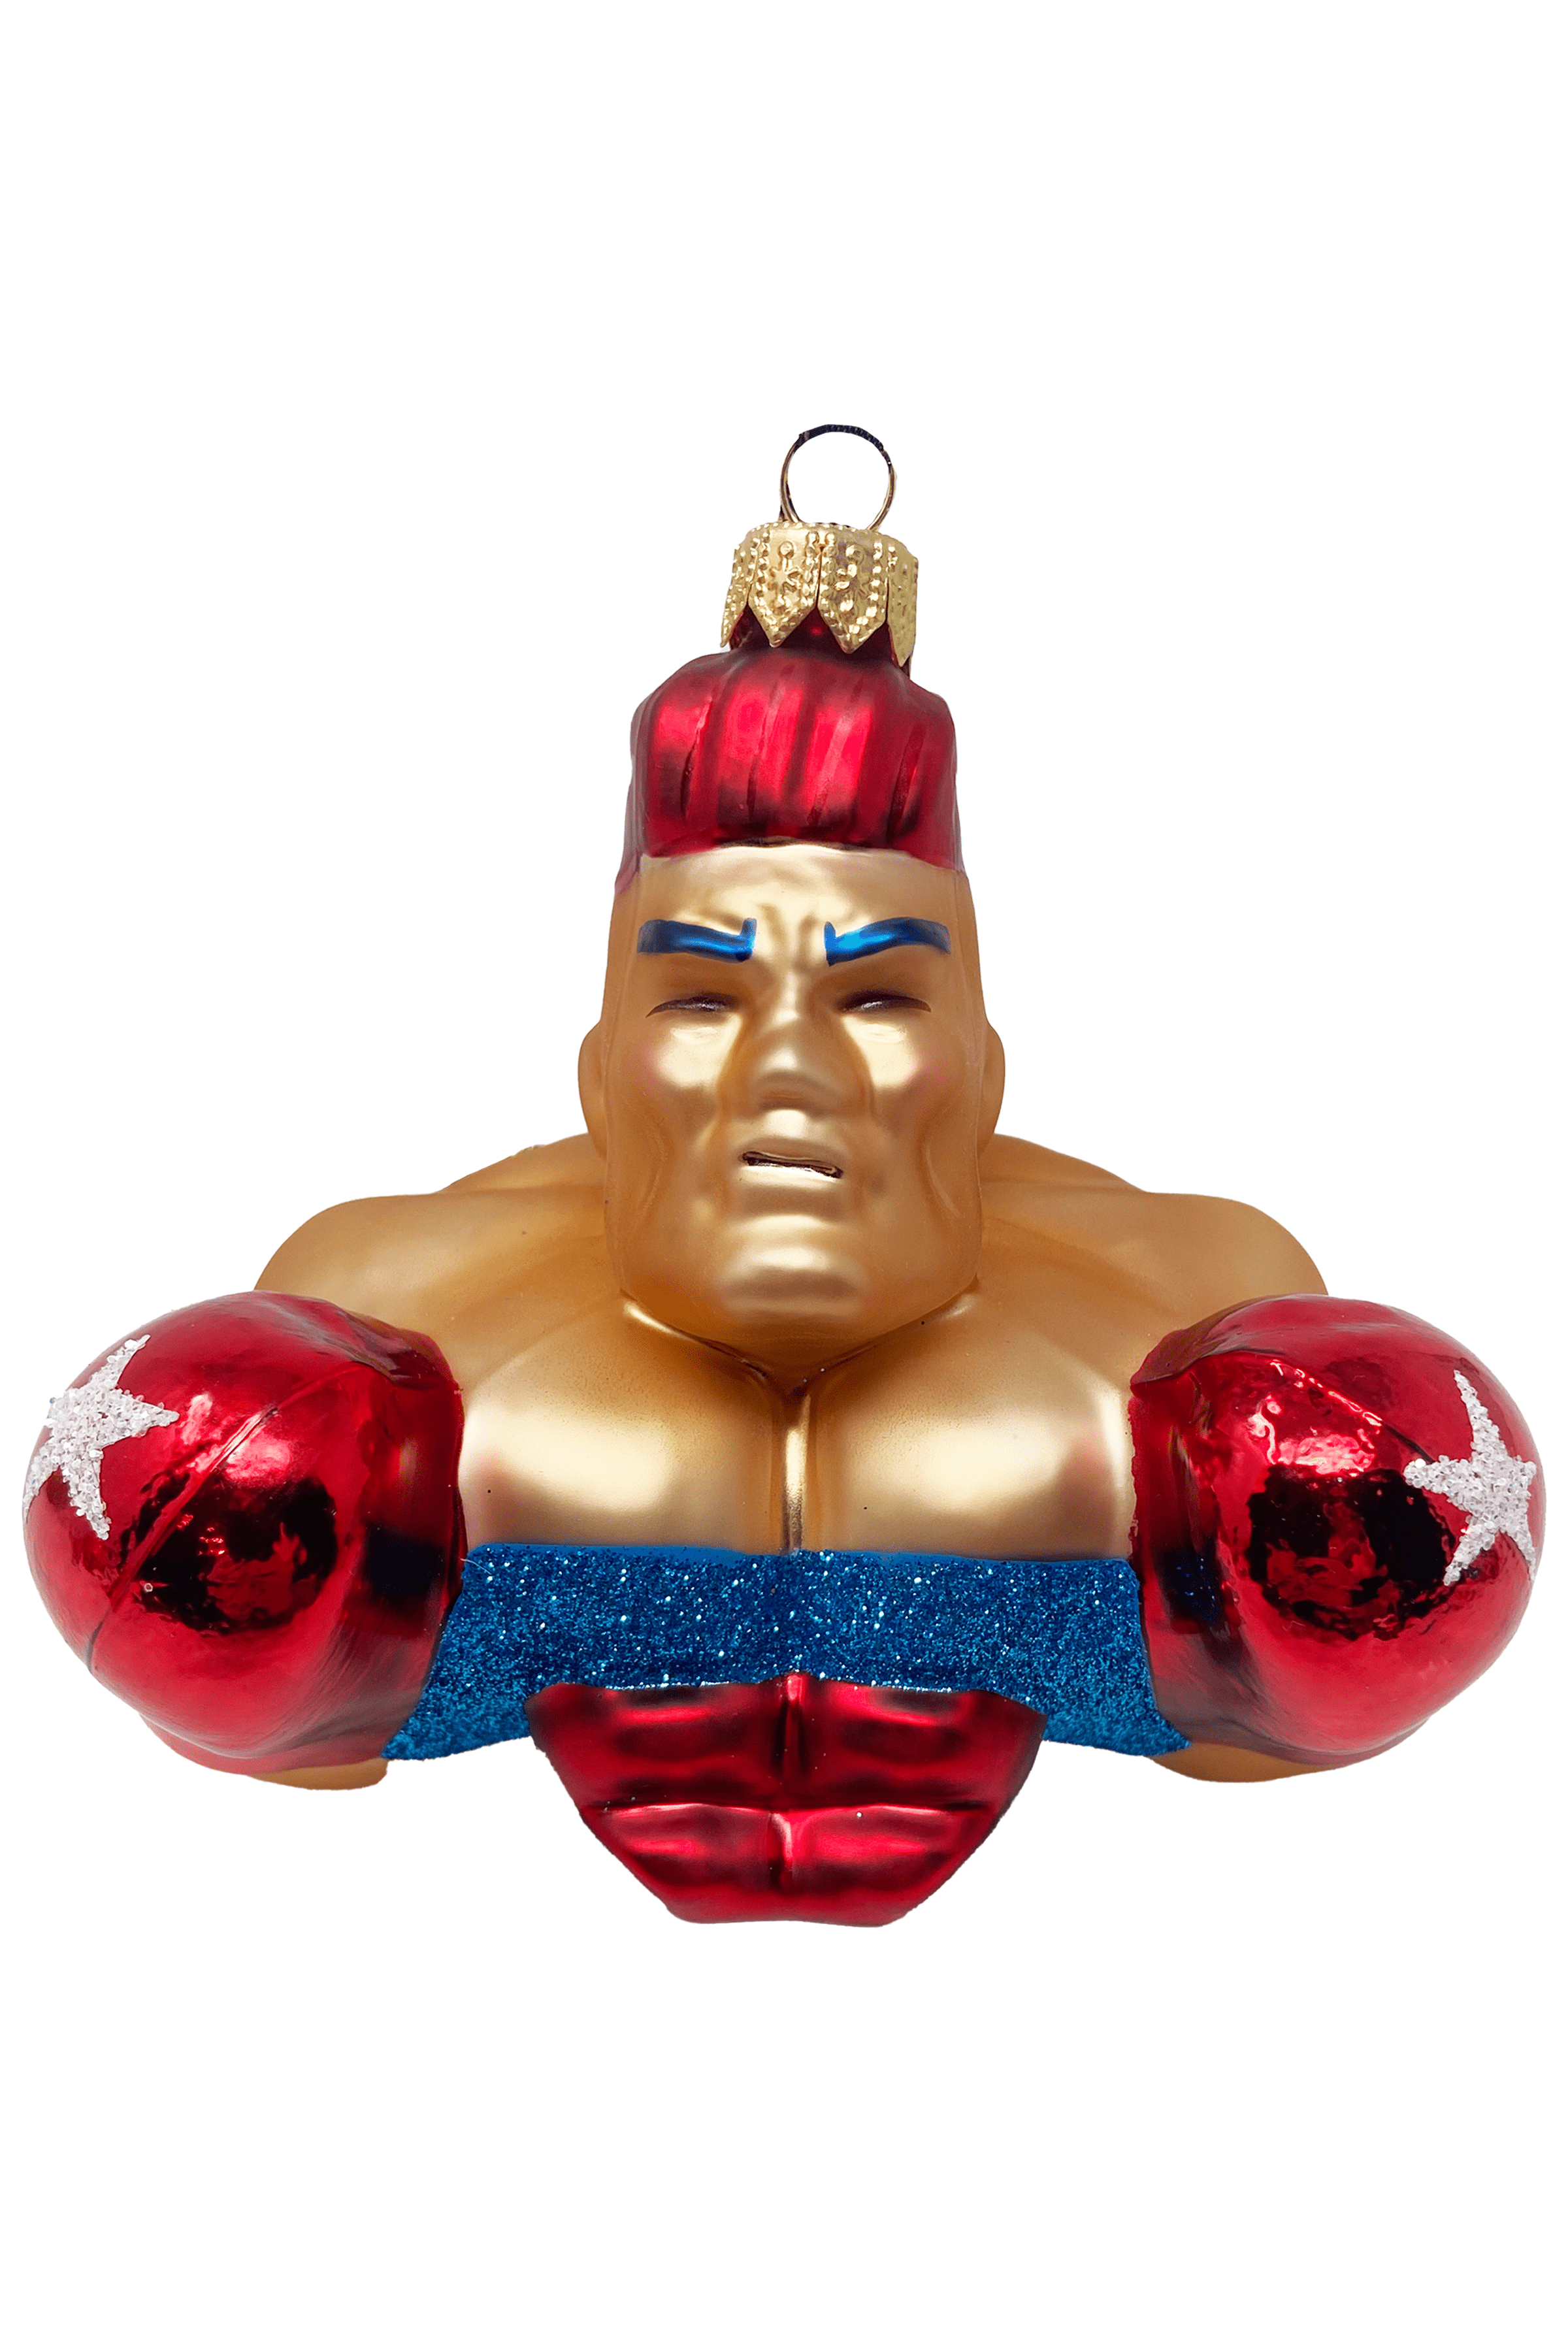 Erik's toy box collection featuring a muscular boxer with boxing gloves and bright colored hair and outfit hanging glass ornament